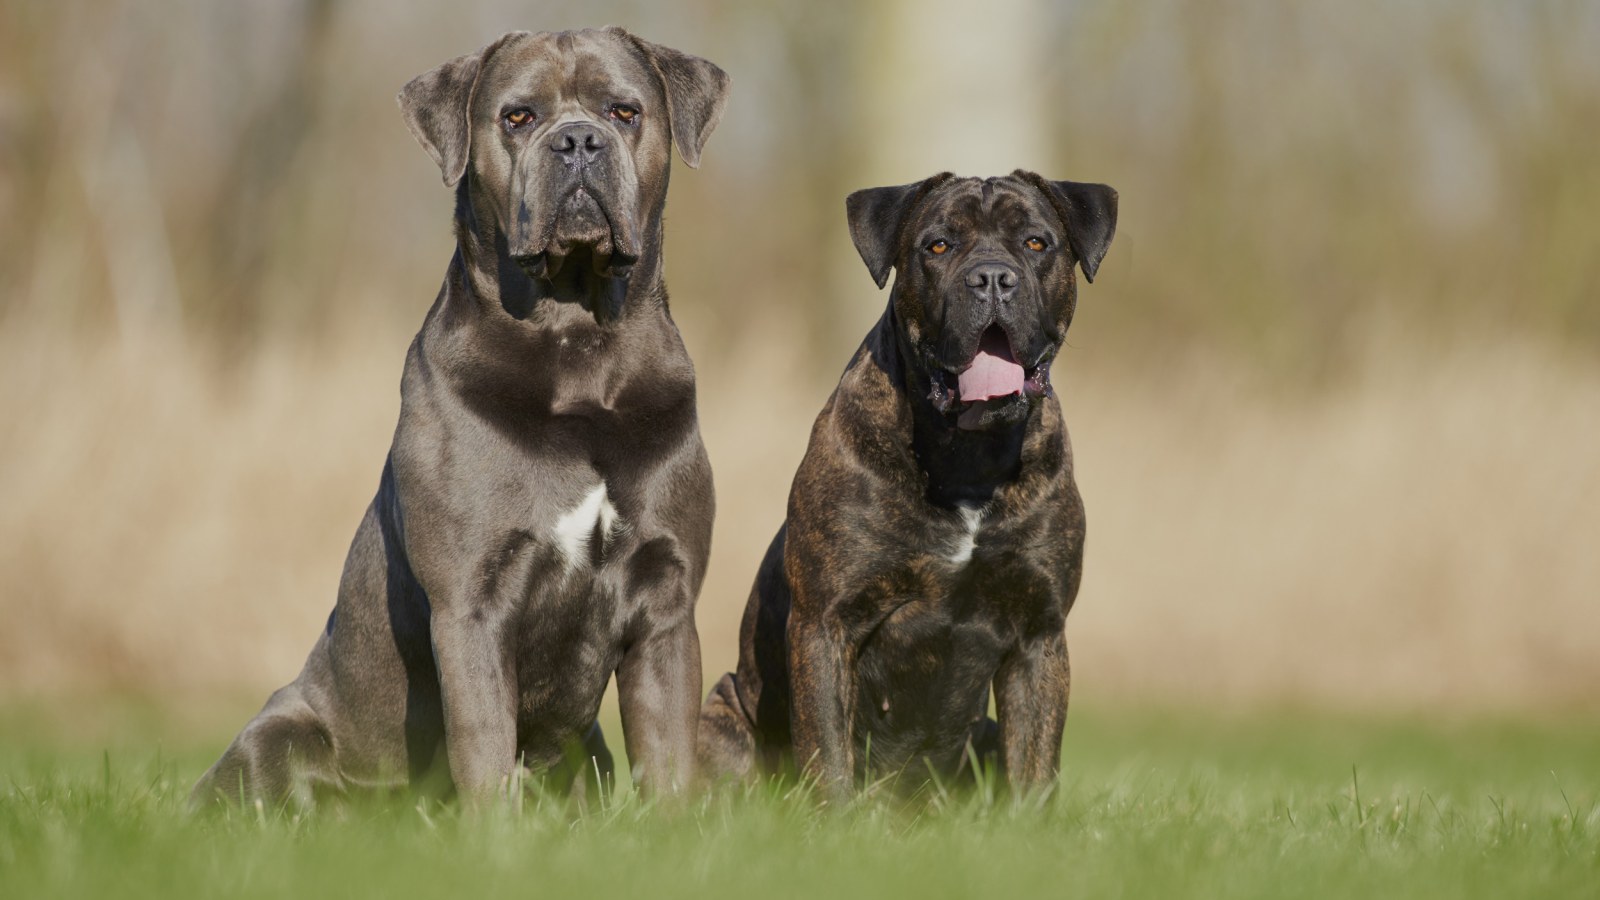 Shock Over Cane Corso Reacting to Suspected Intruder: 'Guard Dog